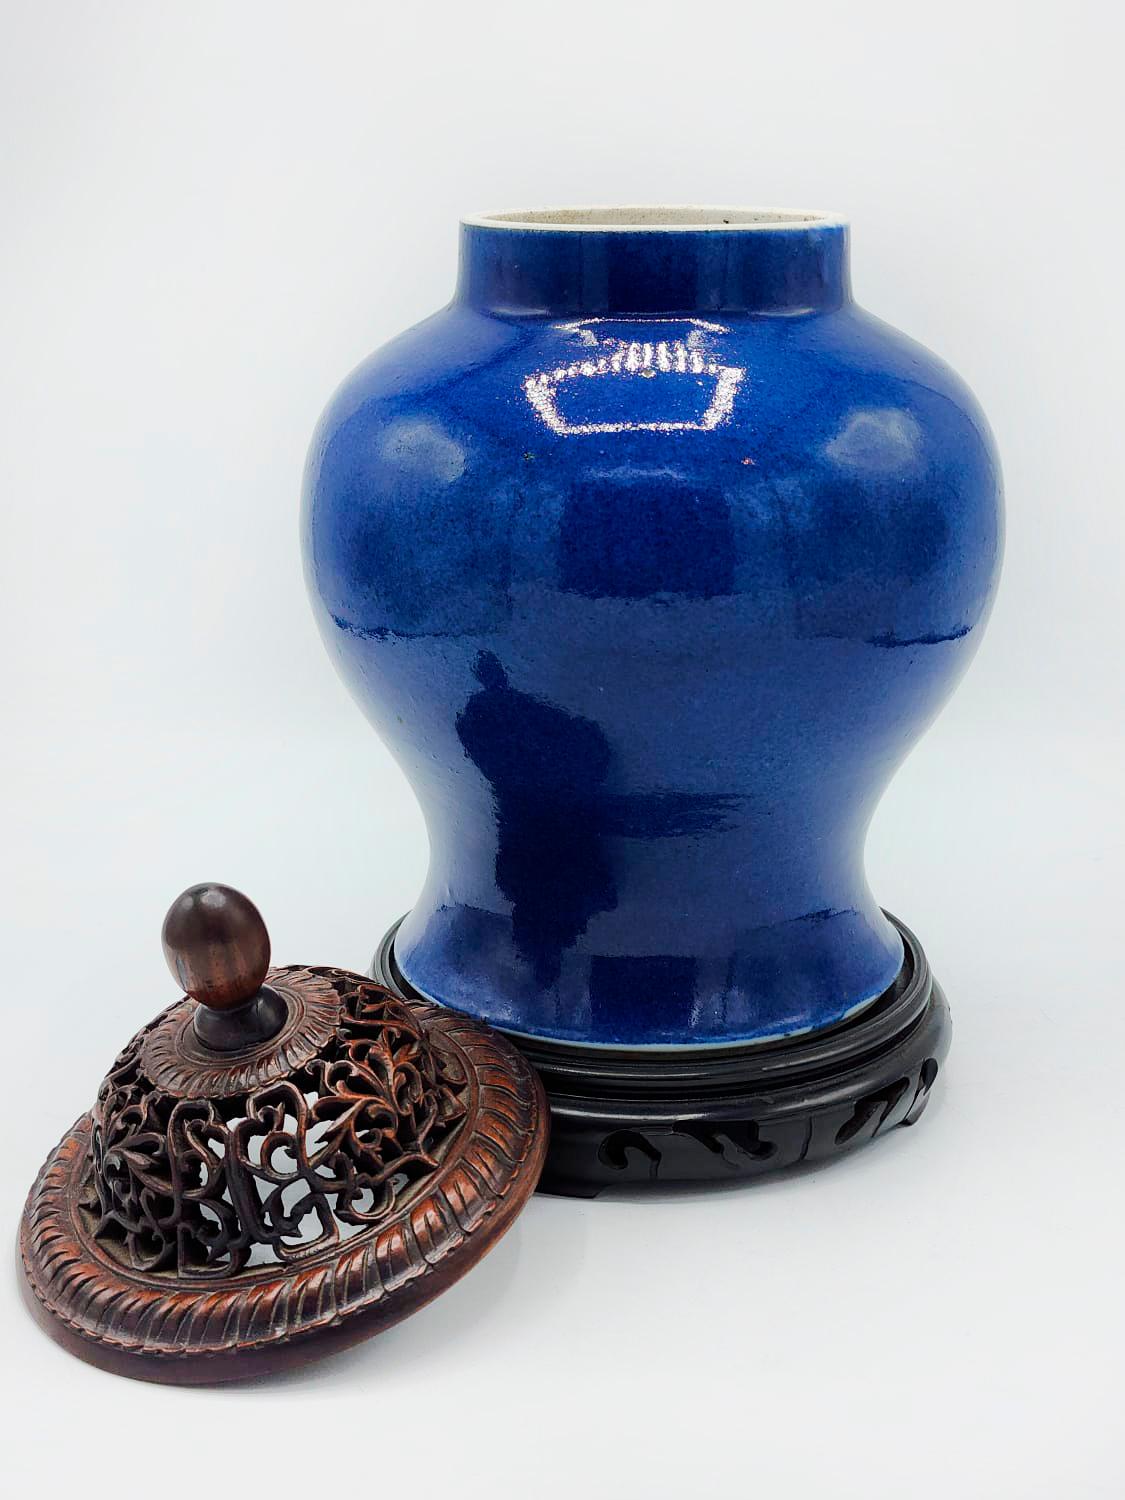 Qing Porcelain vase with carved wooden lid, 19th century Kangxi period For Sale